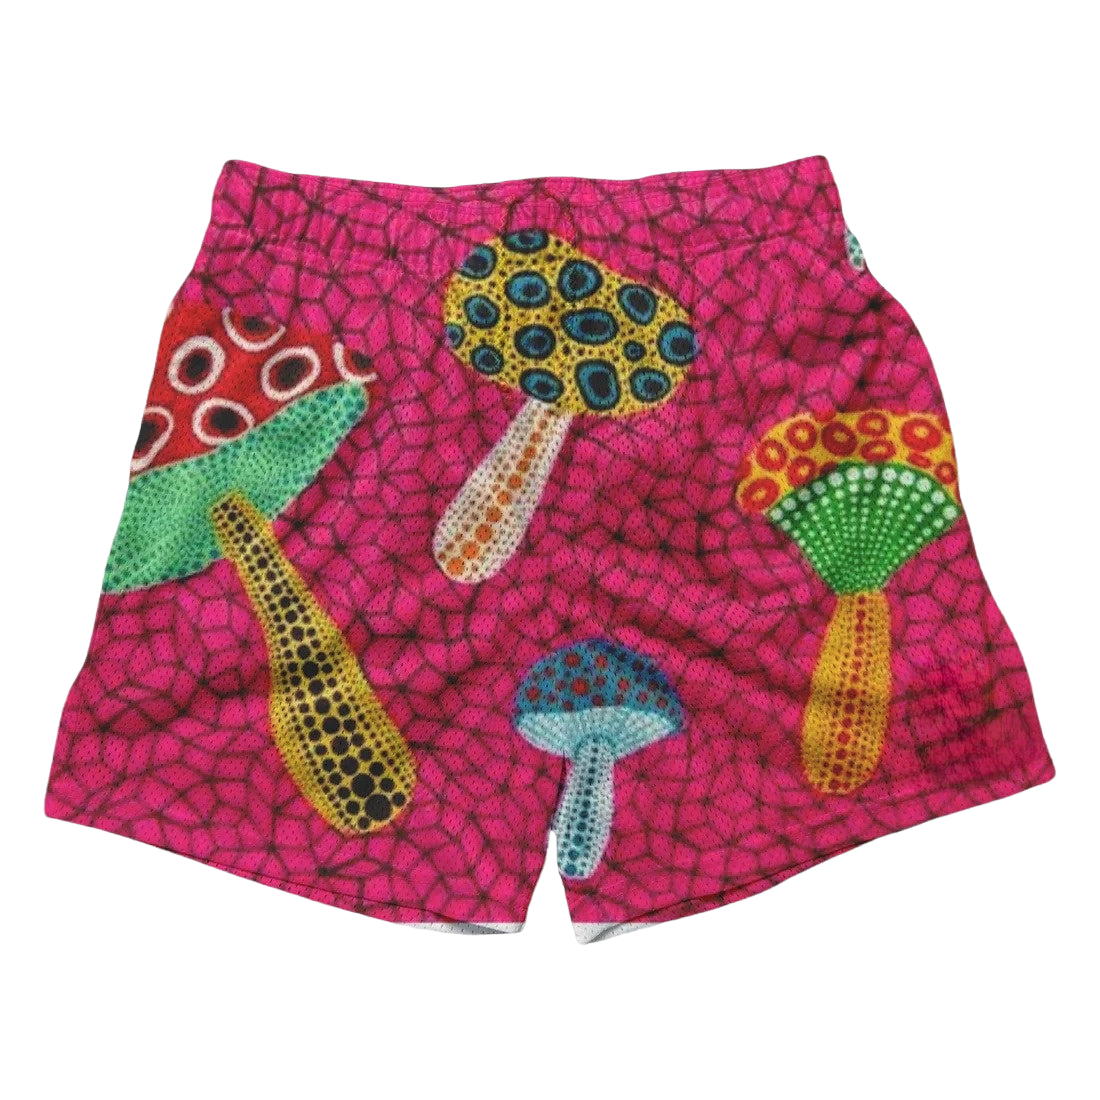 a pink shorts with colorful designs on it